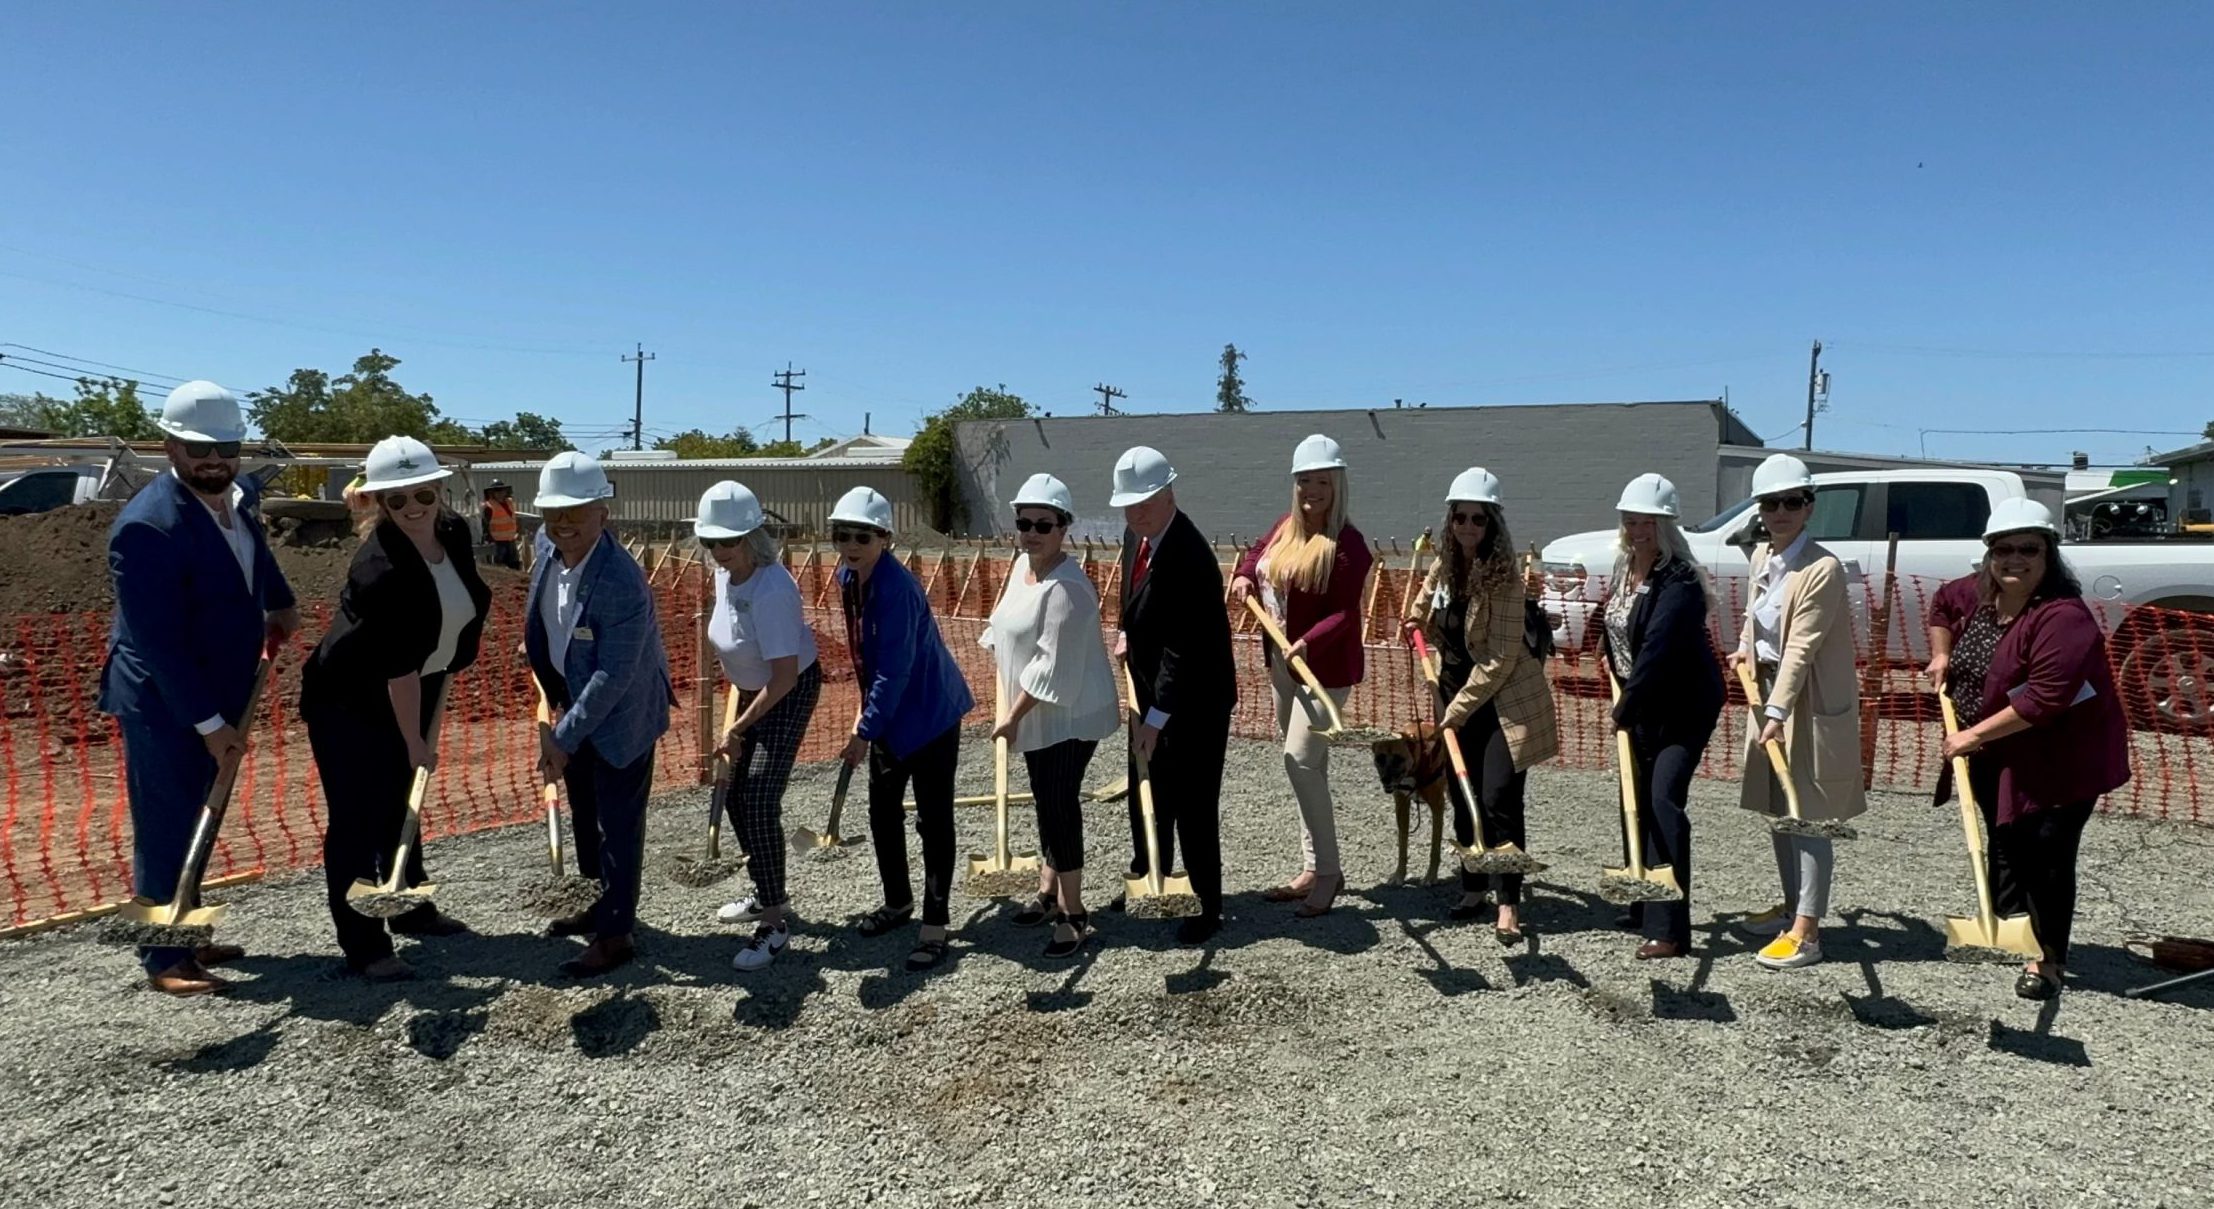 Community Leaders Gathered for the Groundbreaking Ceremony of the Vallejo Navigation Center